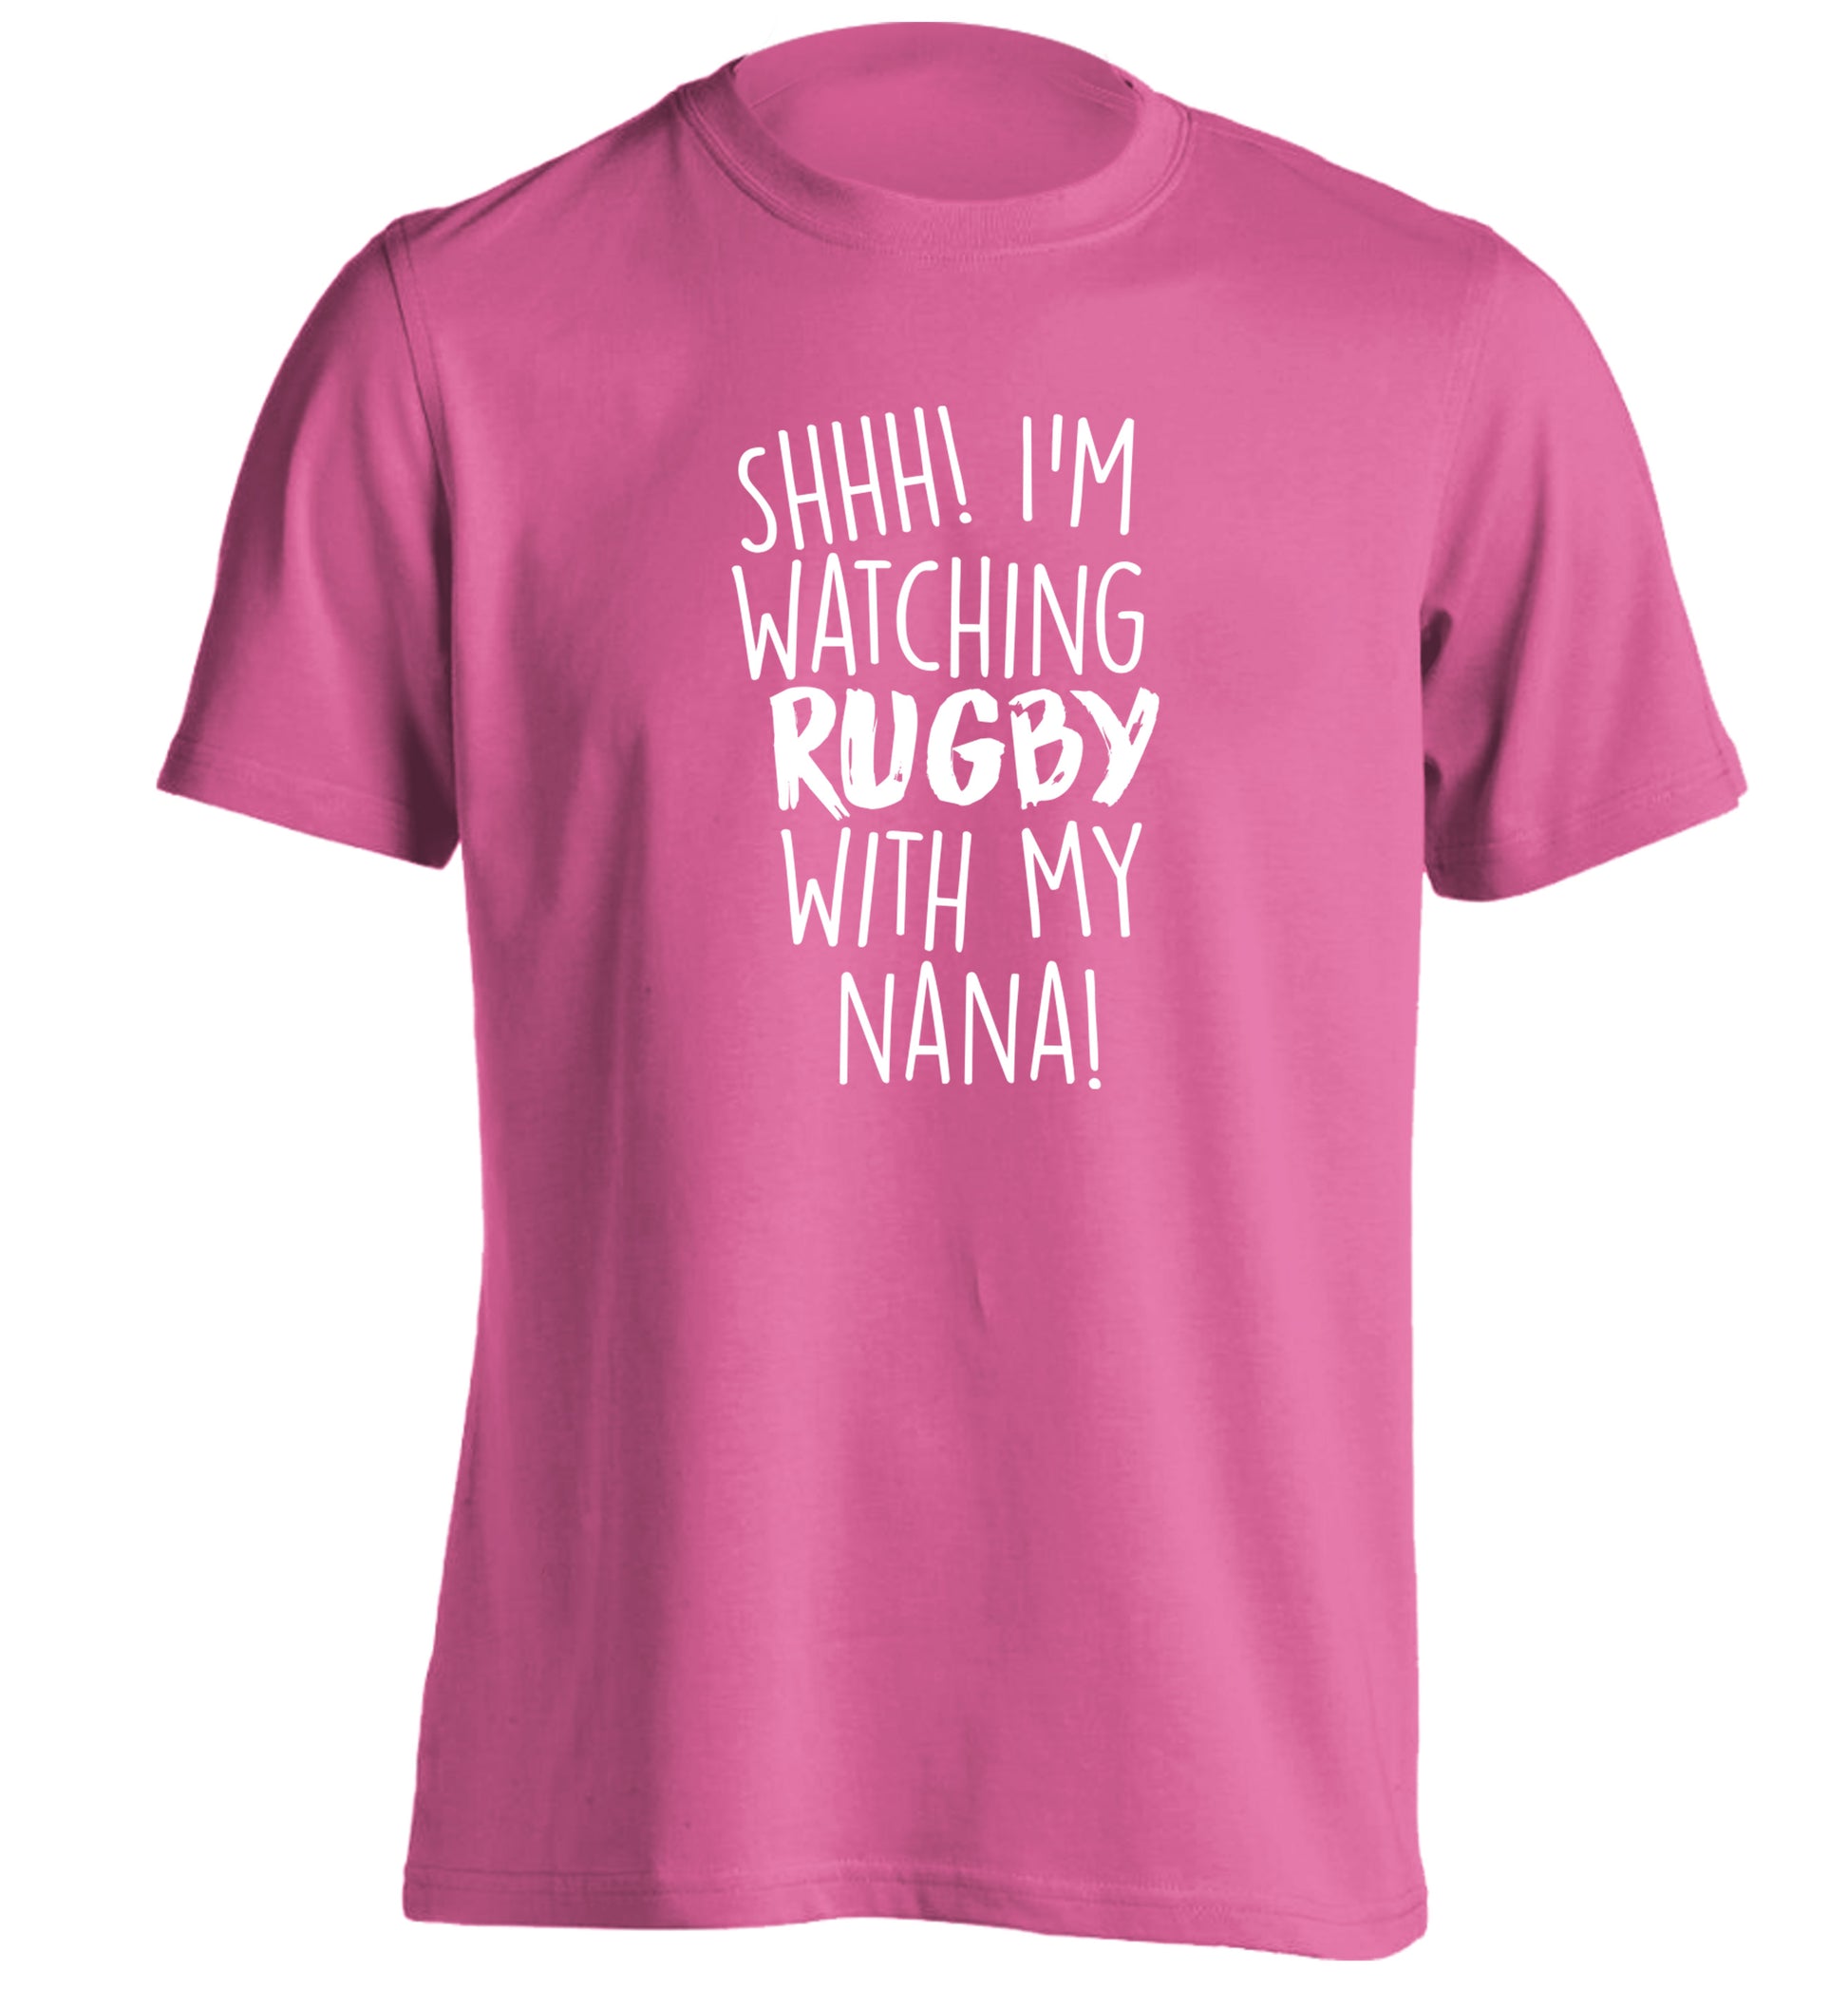 Shh I'm watching rugby with my nana adults unisex pink Tshirt 2XL